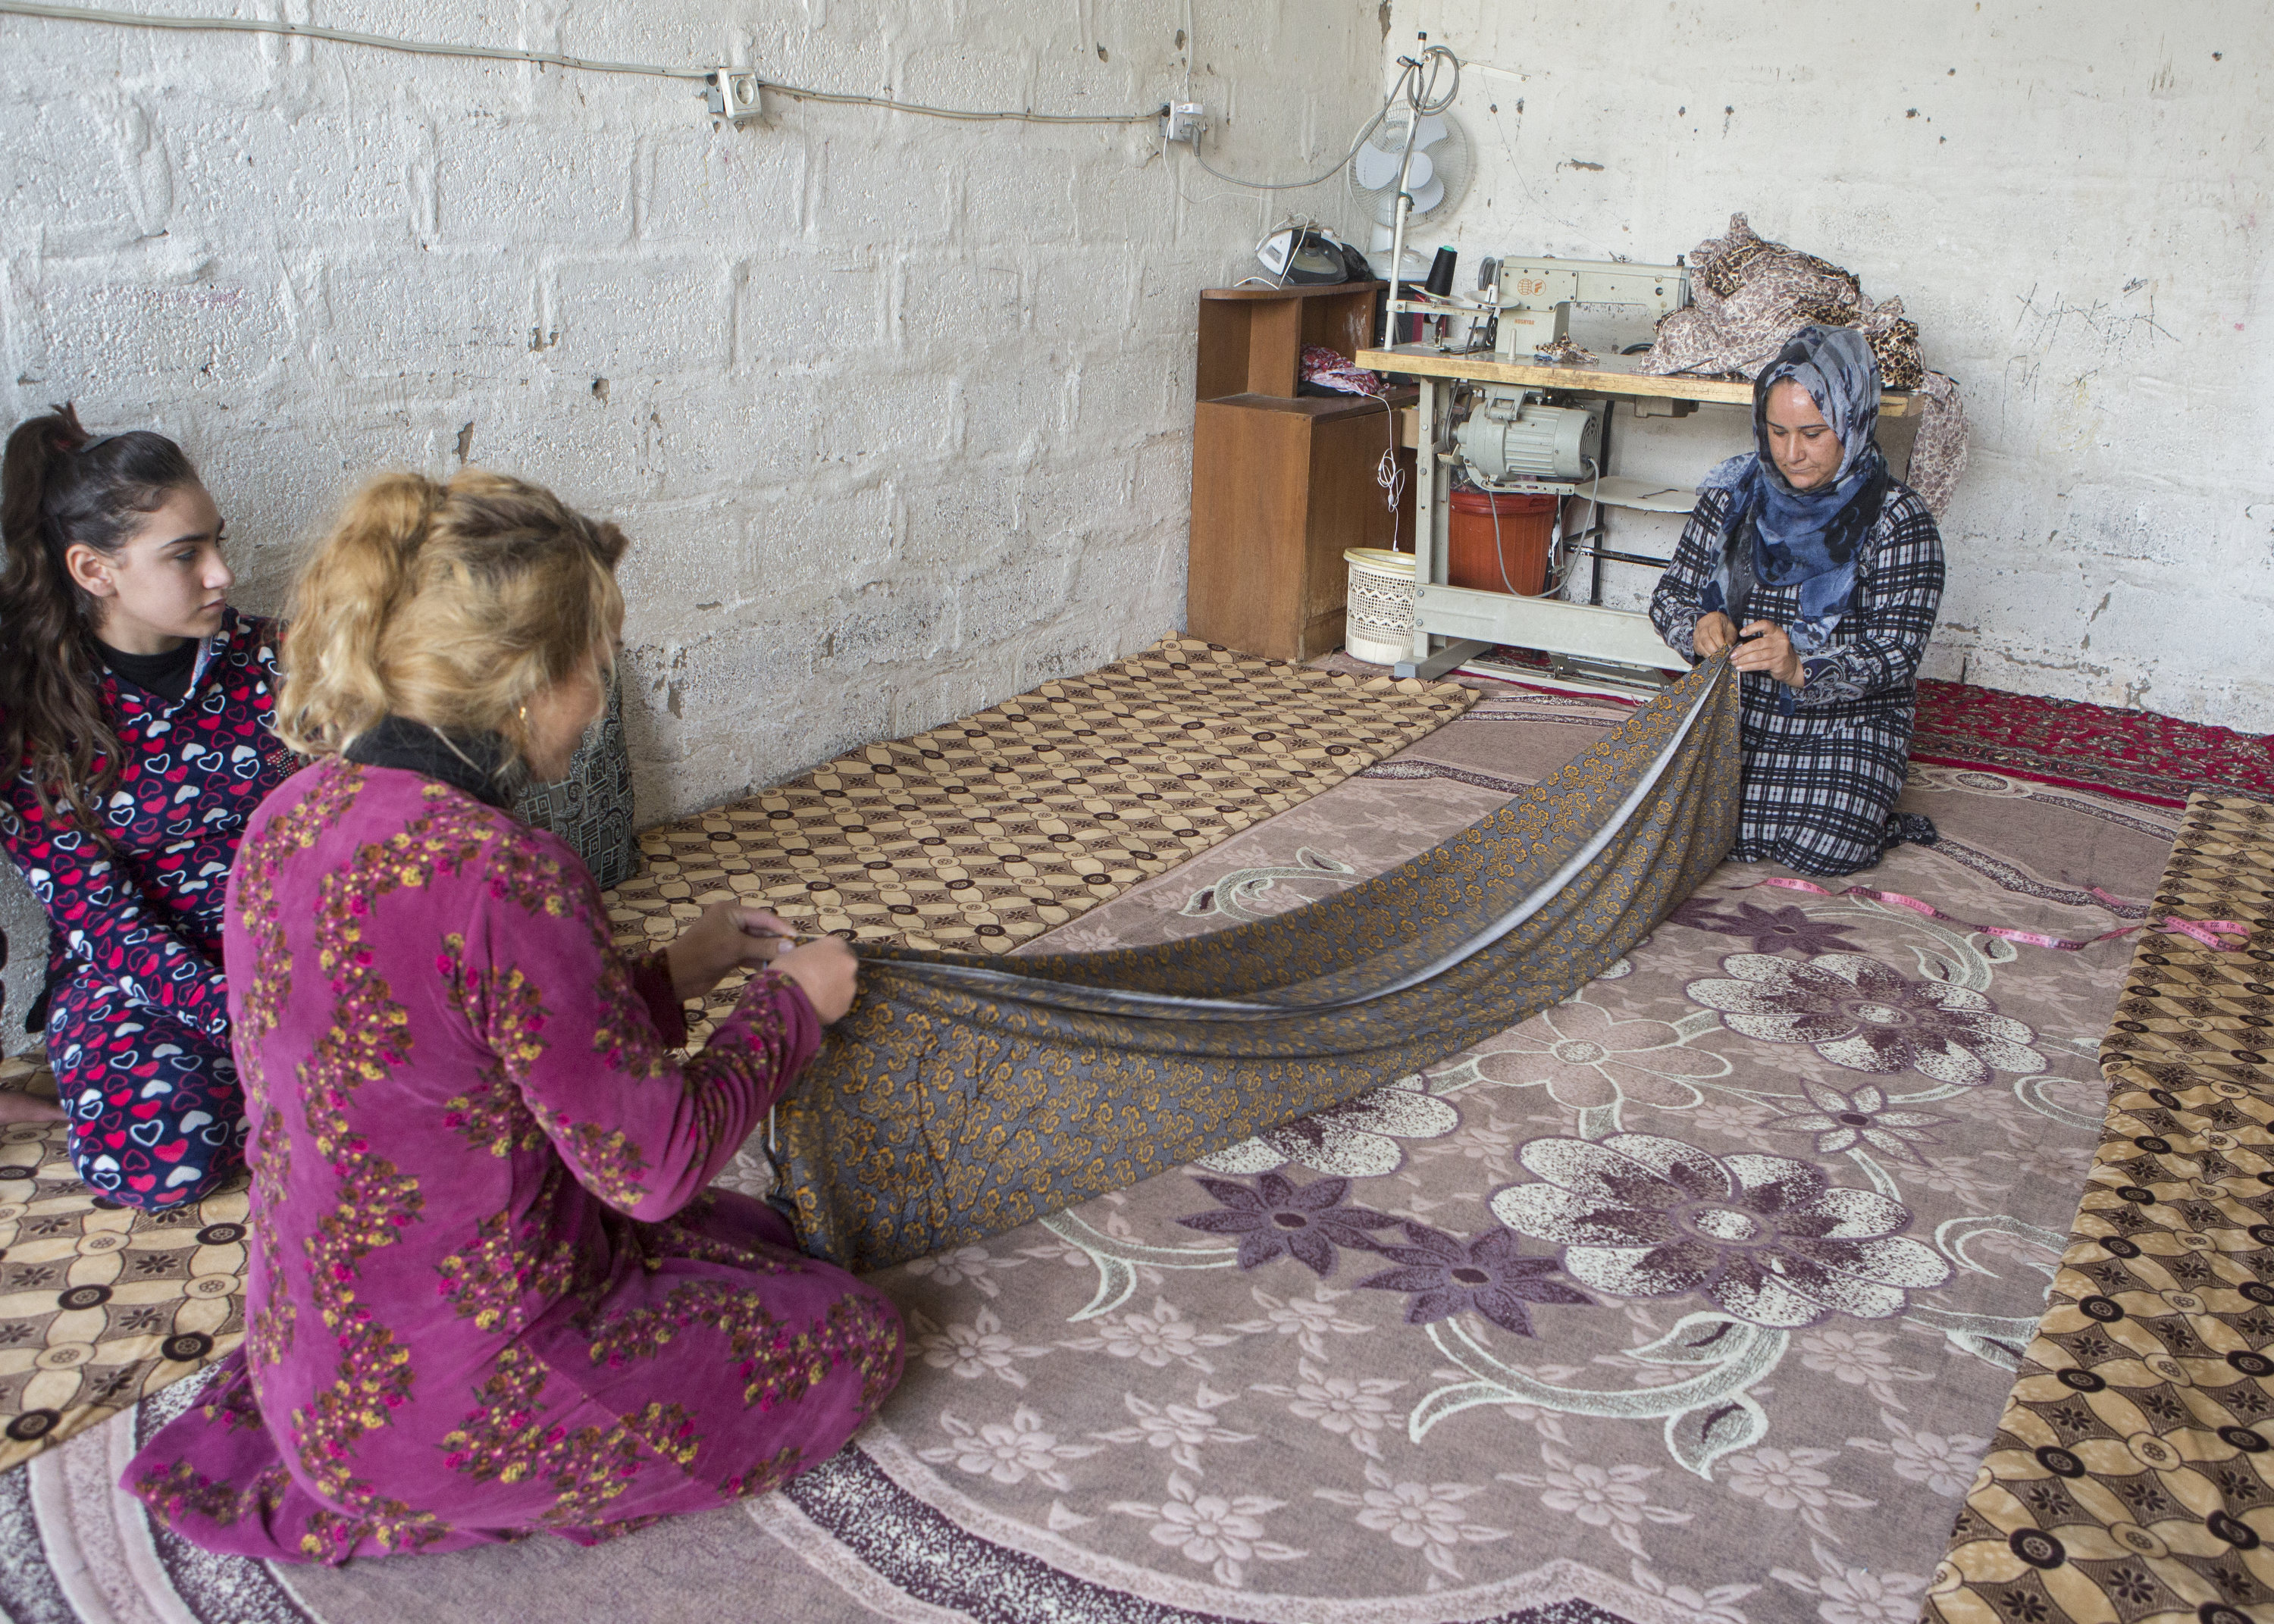 Shireen and her daughter-in-law preparing the fabric for the traditional Kurdish dress. Photo: Alison Baskerville.